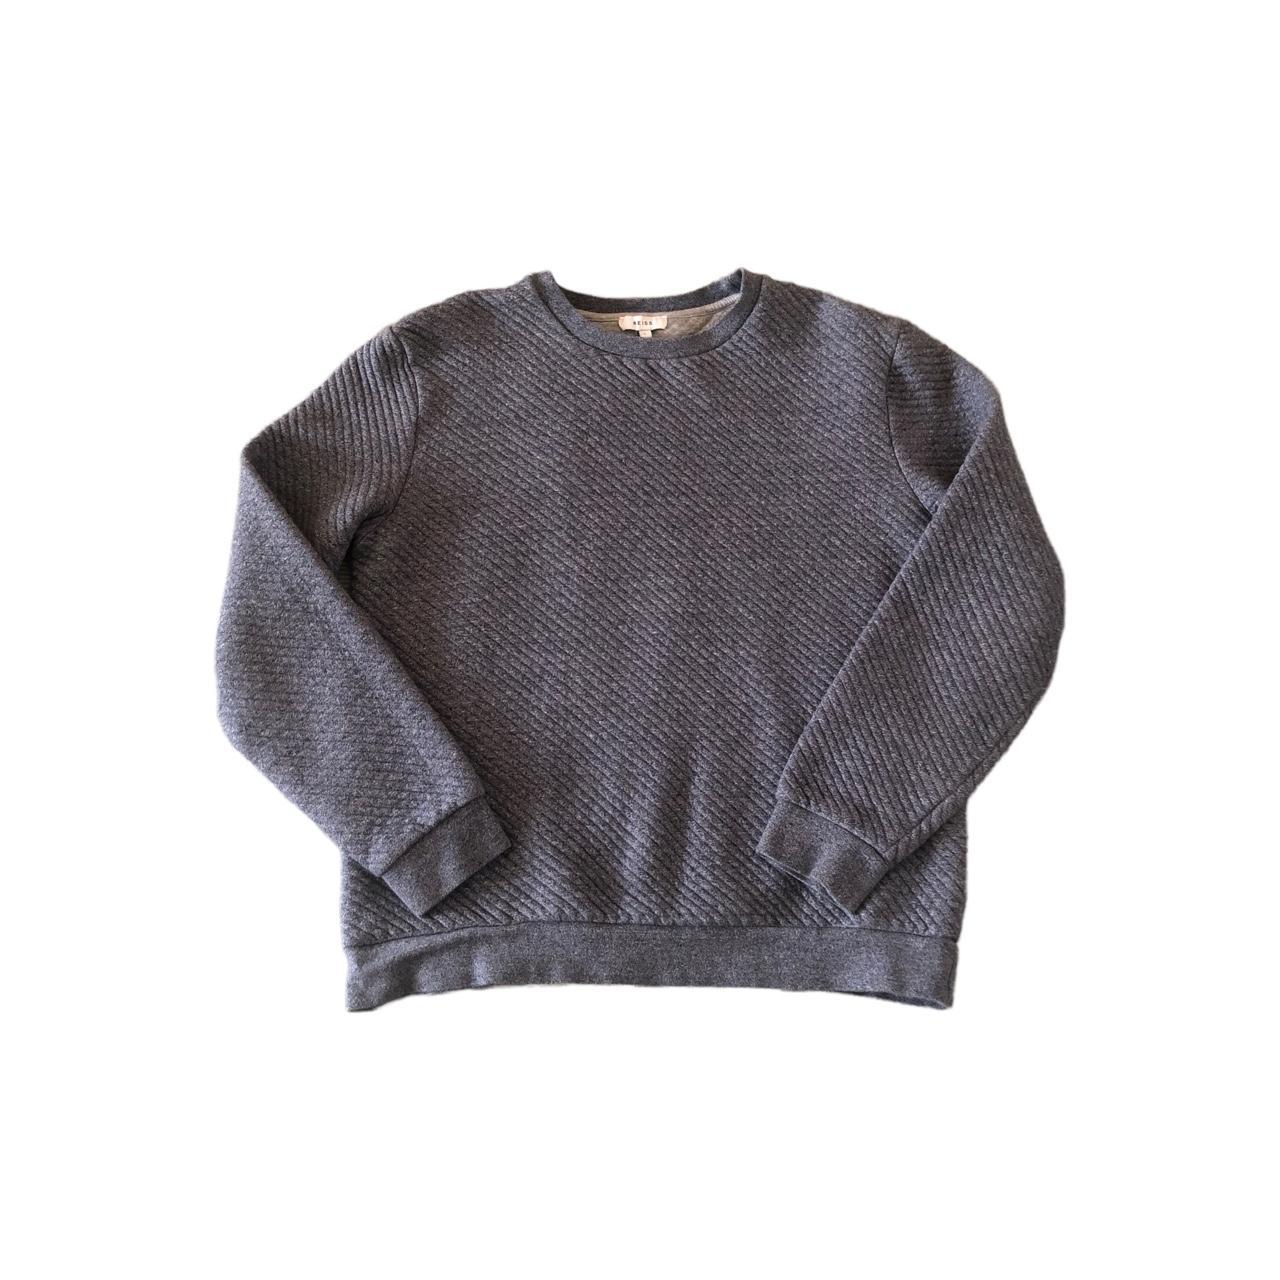 Product Image 1 - Reiss quilted crewneck sweater. Blue-gray